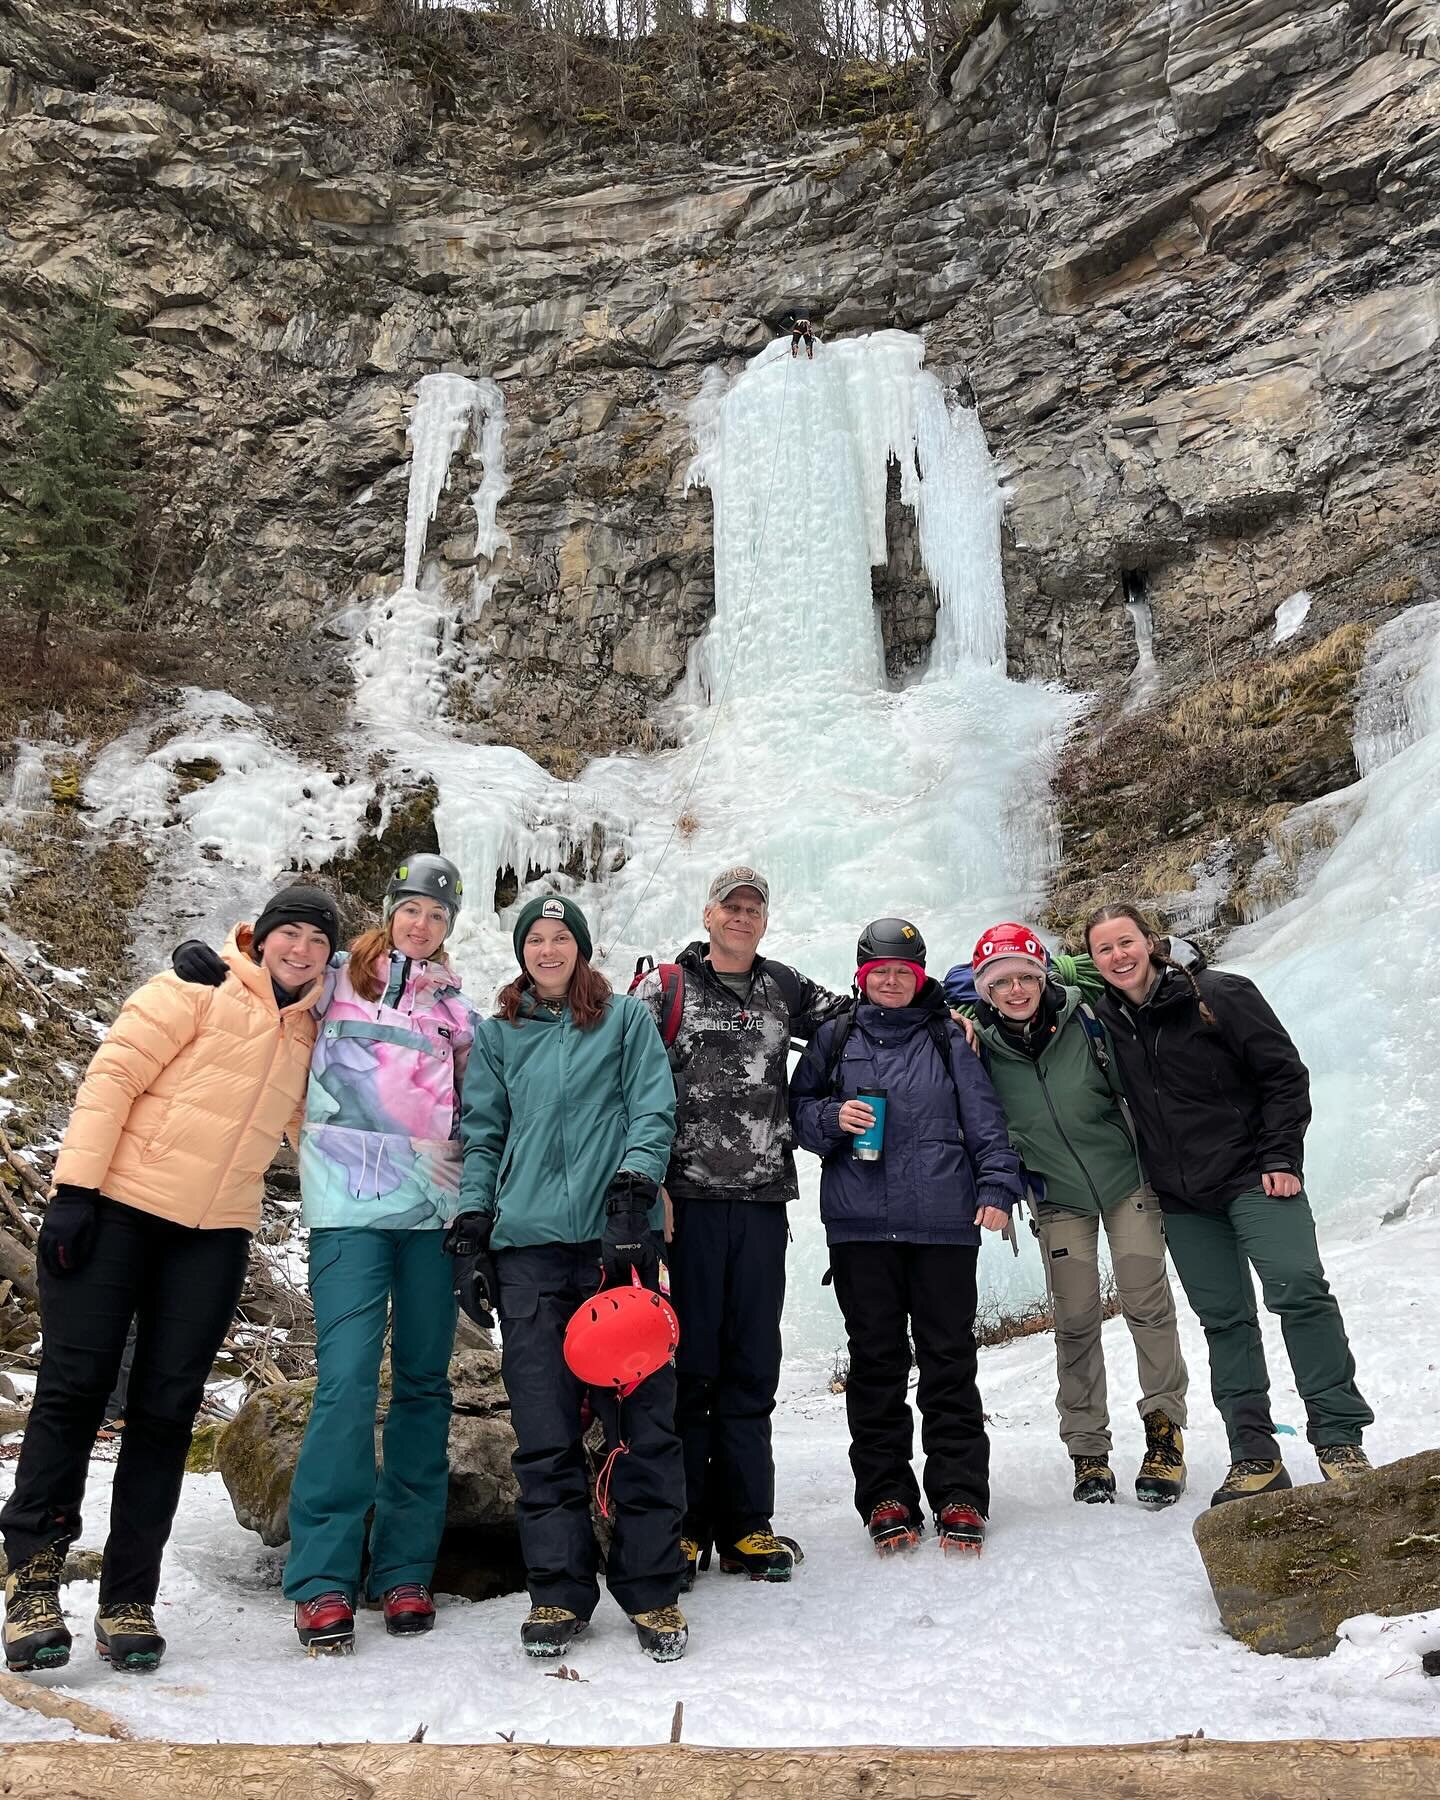 A great day of ice climbing as part of the Third Annual Peace Region Ice Extravaganza. Excellent quality ice and crew! 
. 
Thank you to heliadventure and @ianwelsted for organizing and having us along. 😄
.
@acmg.ca 
.
Traditional territories of Beav